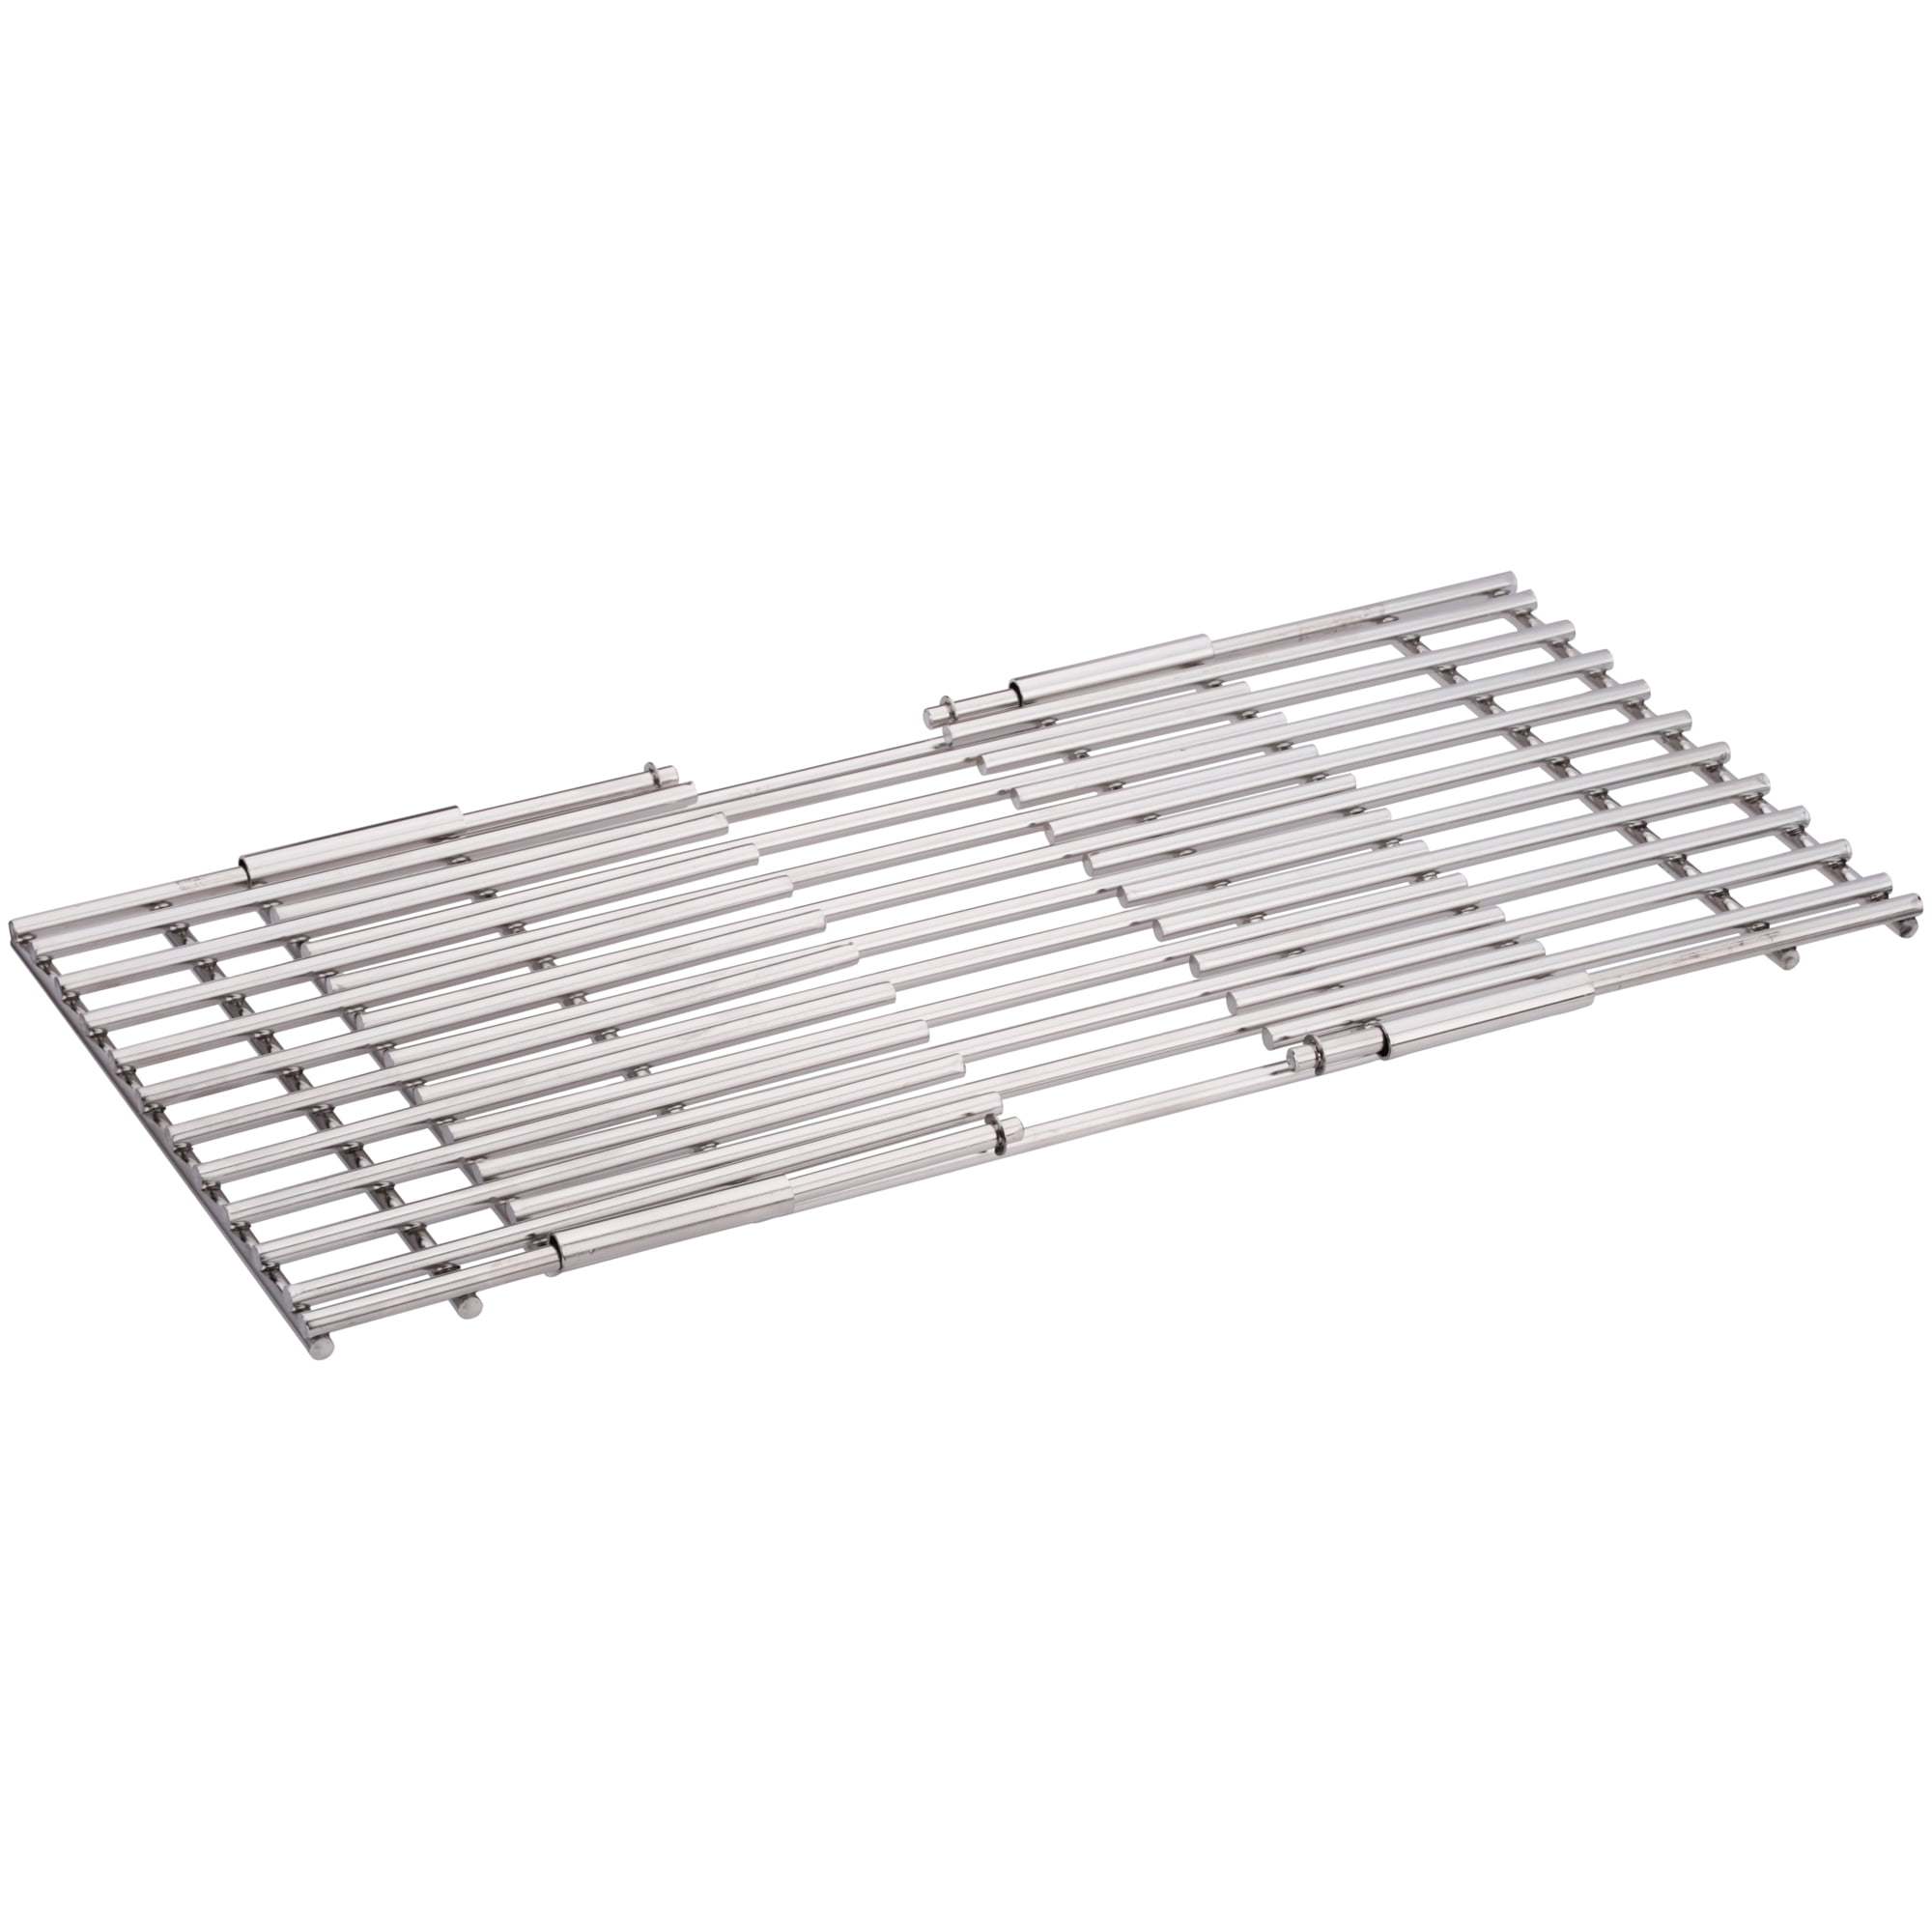 Char-Broil® Fix It Up? Universal Stainless Steel Grill Grate - Walmart Char Broil Stainless Steel Grill Grates